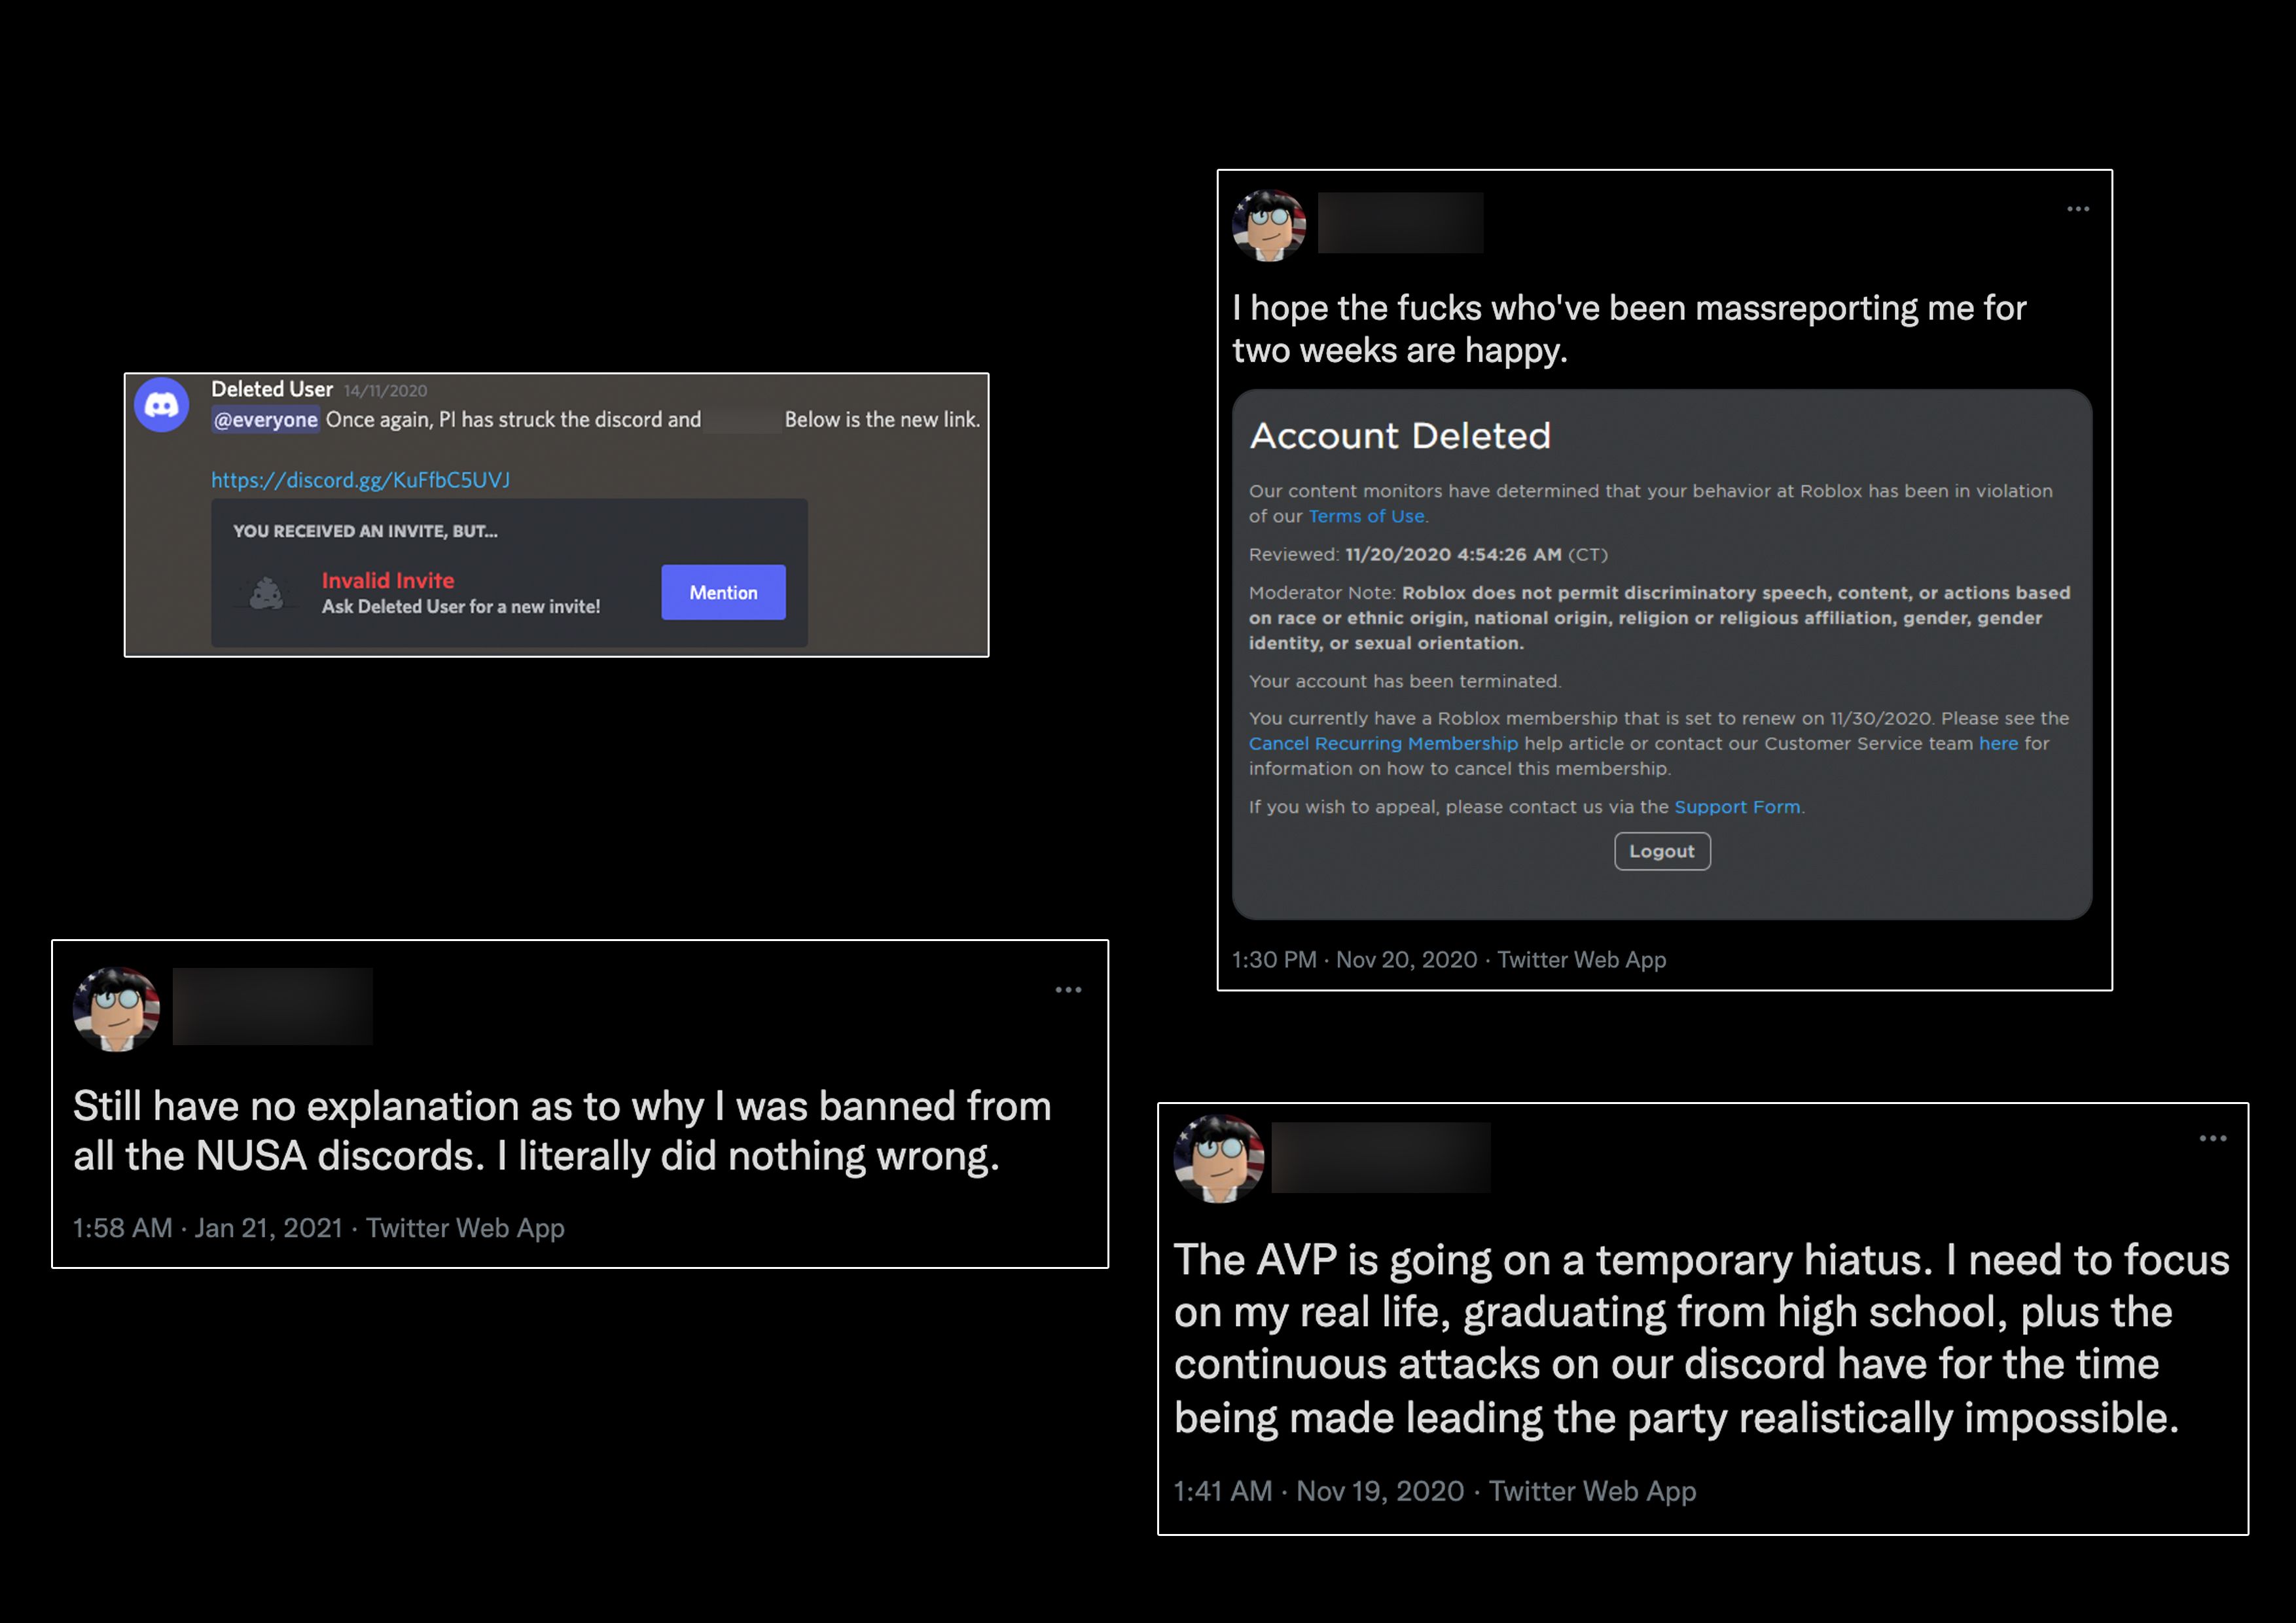 A series of tweets from the Valkist Party leader discussing the banning’s and the party going on hiatus along with a Discord message saying Patriot Imperium has struck the server and the leader